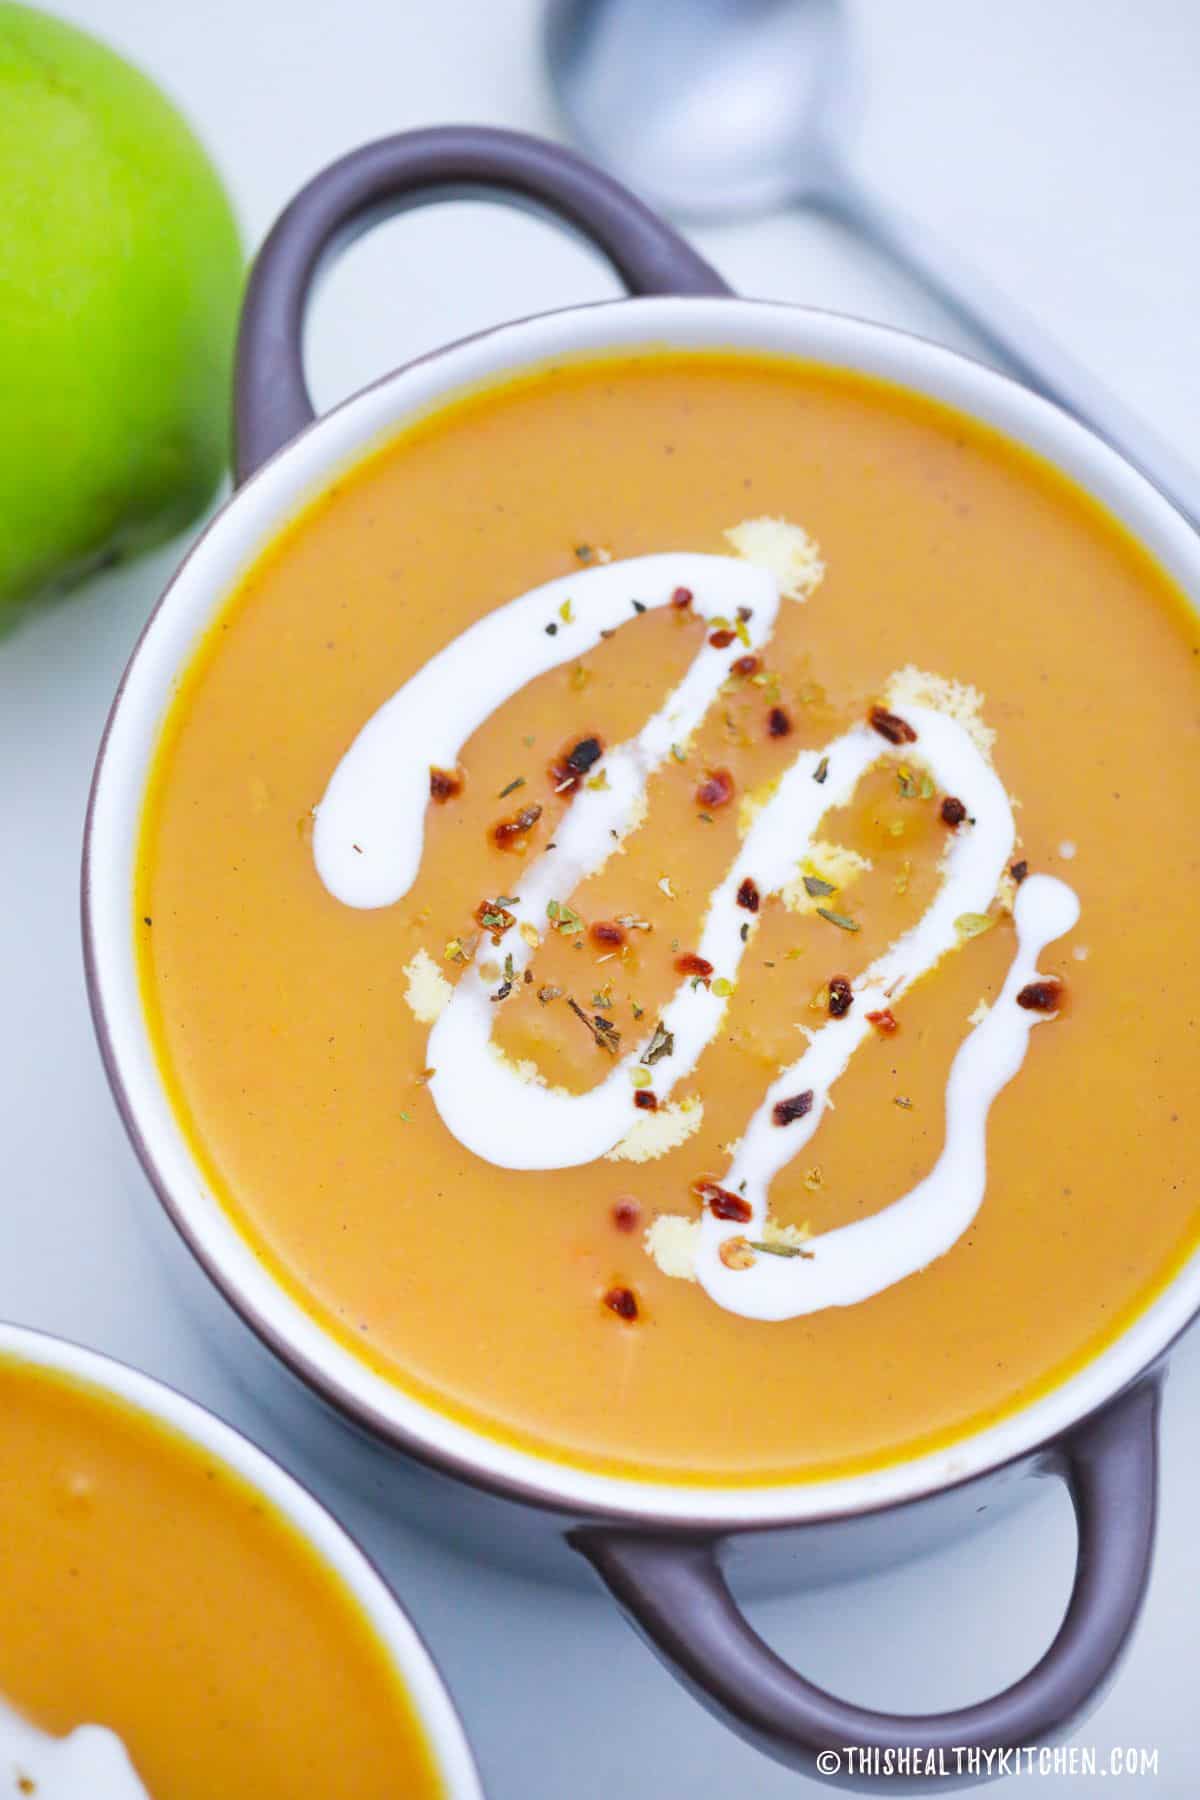 Butternut squash soup with sour cream drizzle and chili flakes on top.